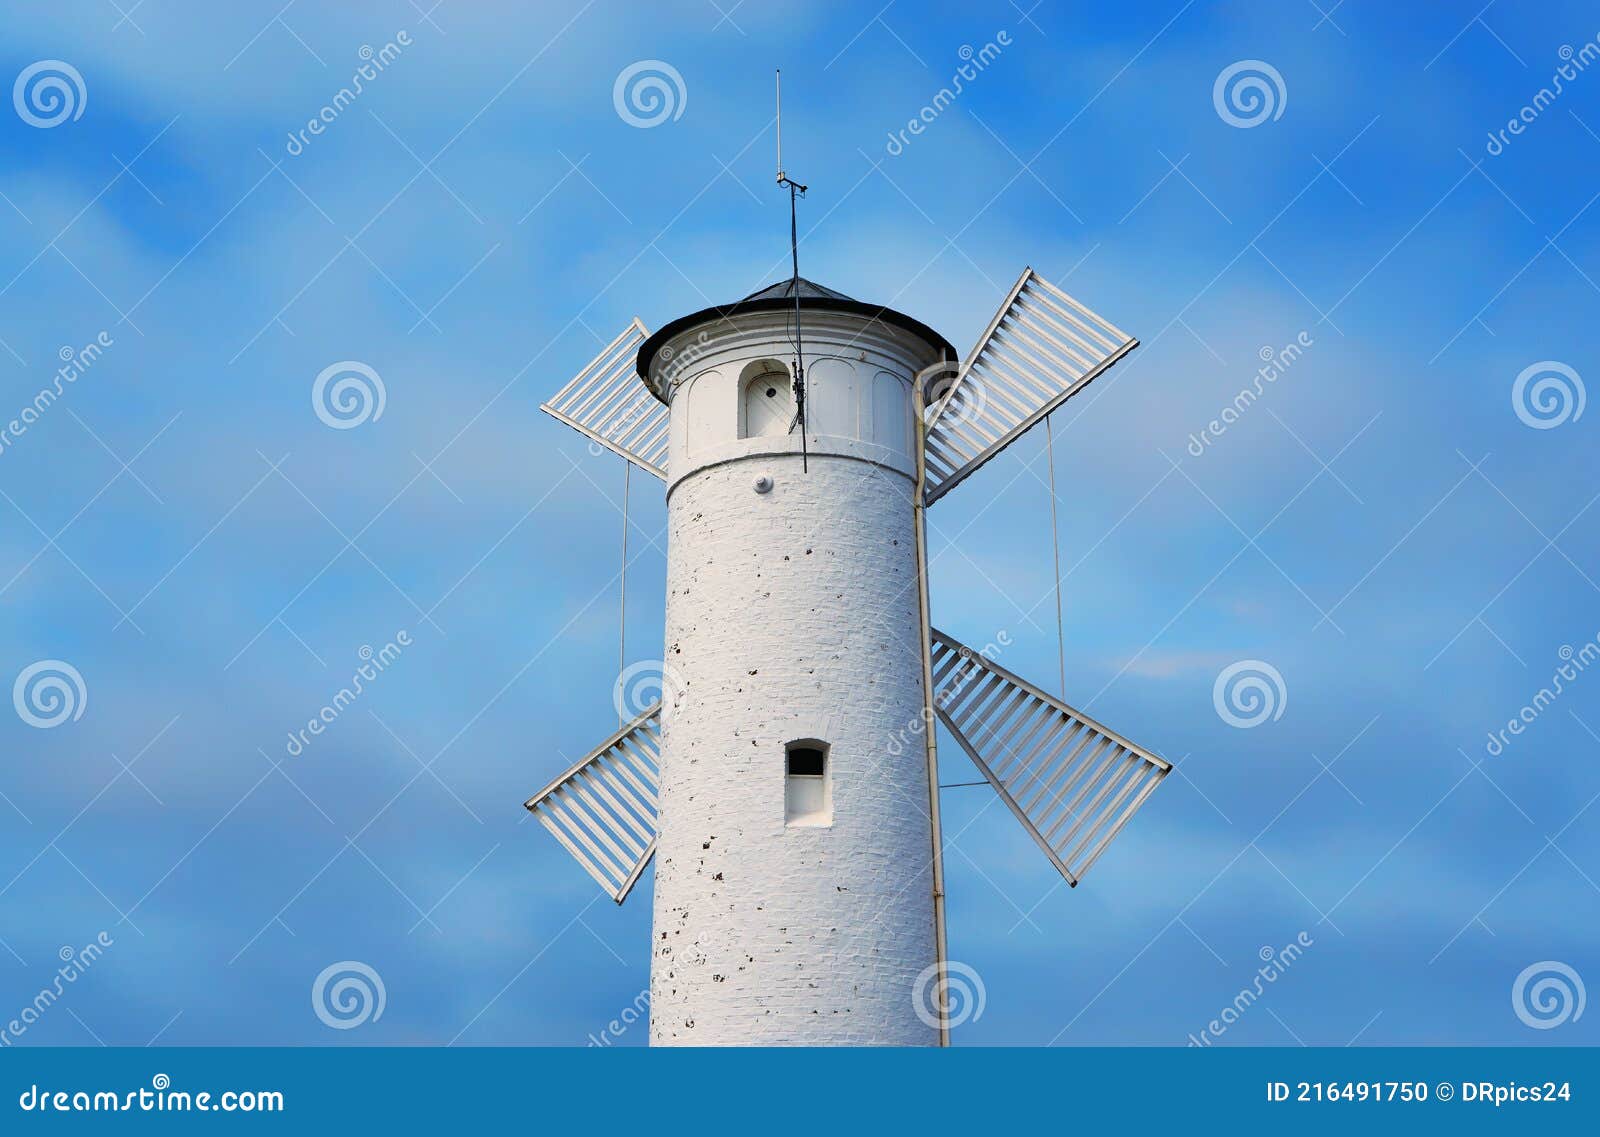 White Old Lighthouse Windmill with Blurred Background in Swinoujscie on the Baltic Sea in Poland Photo - of blue: 216491750